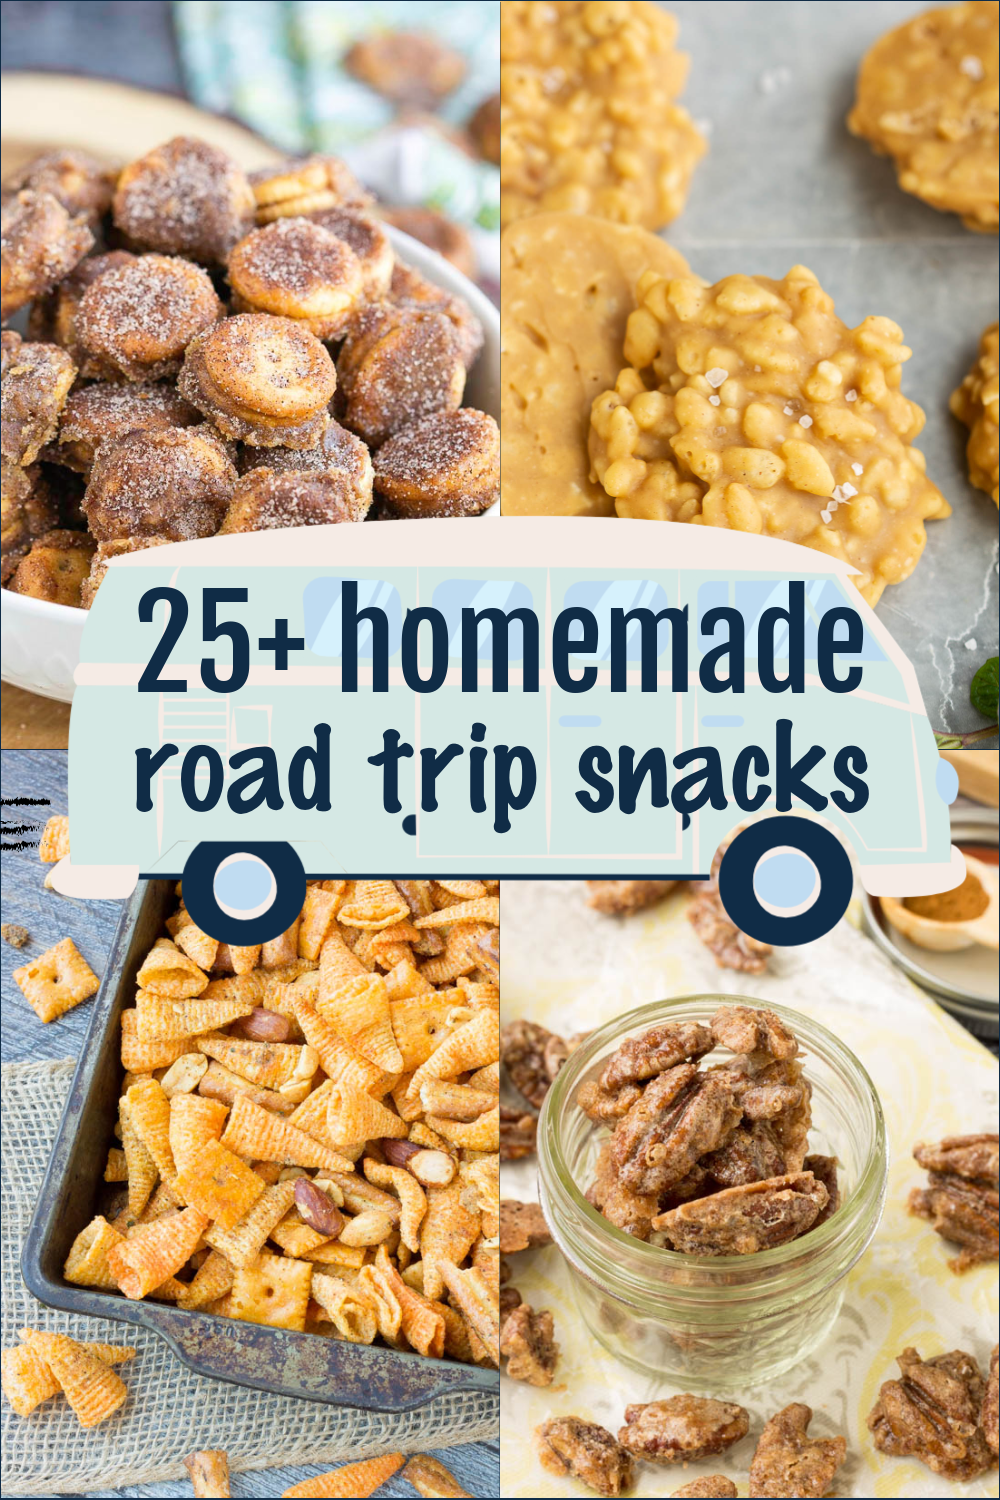 A collage of homemade road trip snacks including sugared pretzels, peanut brittle, cheddar crackers, and candied nuts with the text "25+ homemade road trip snacks" displayed on a blue van illustration.